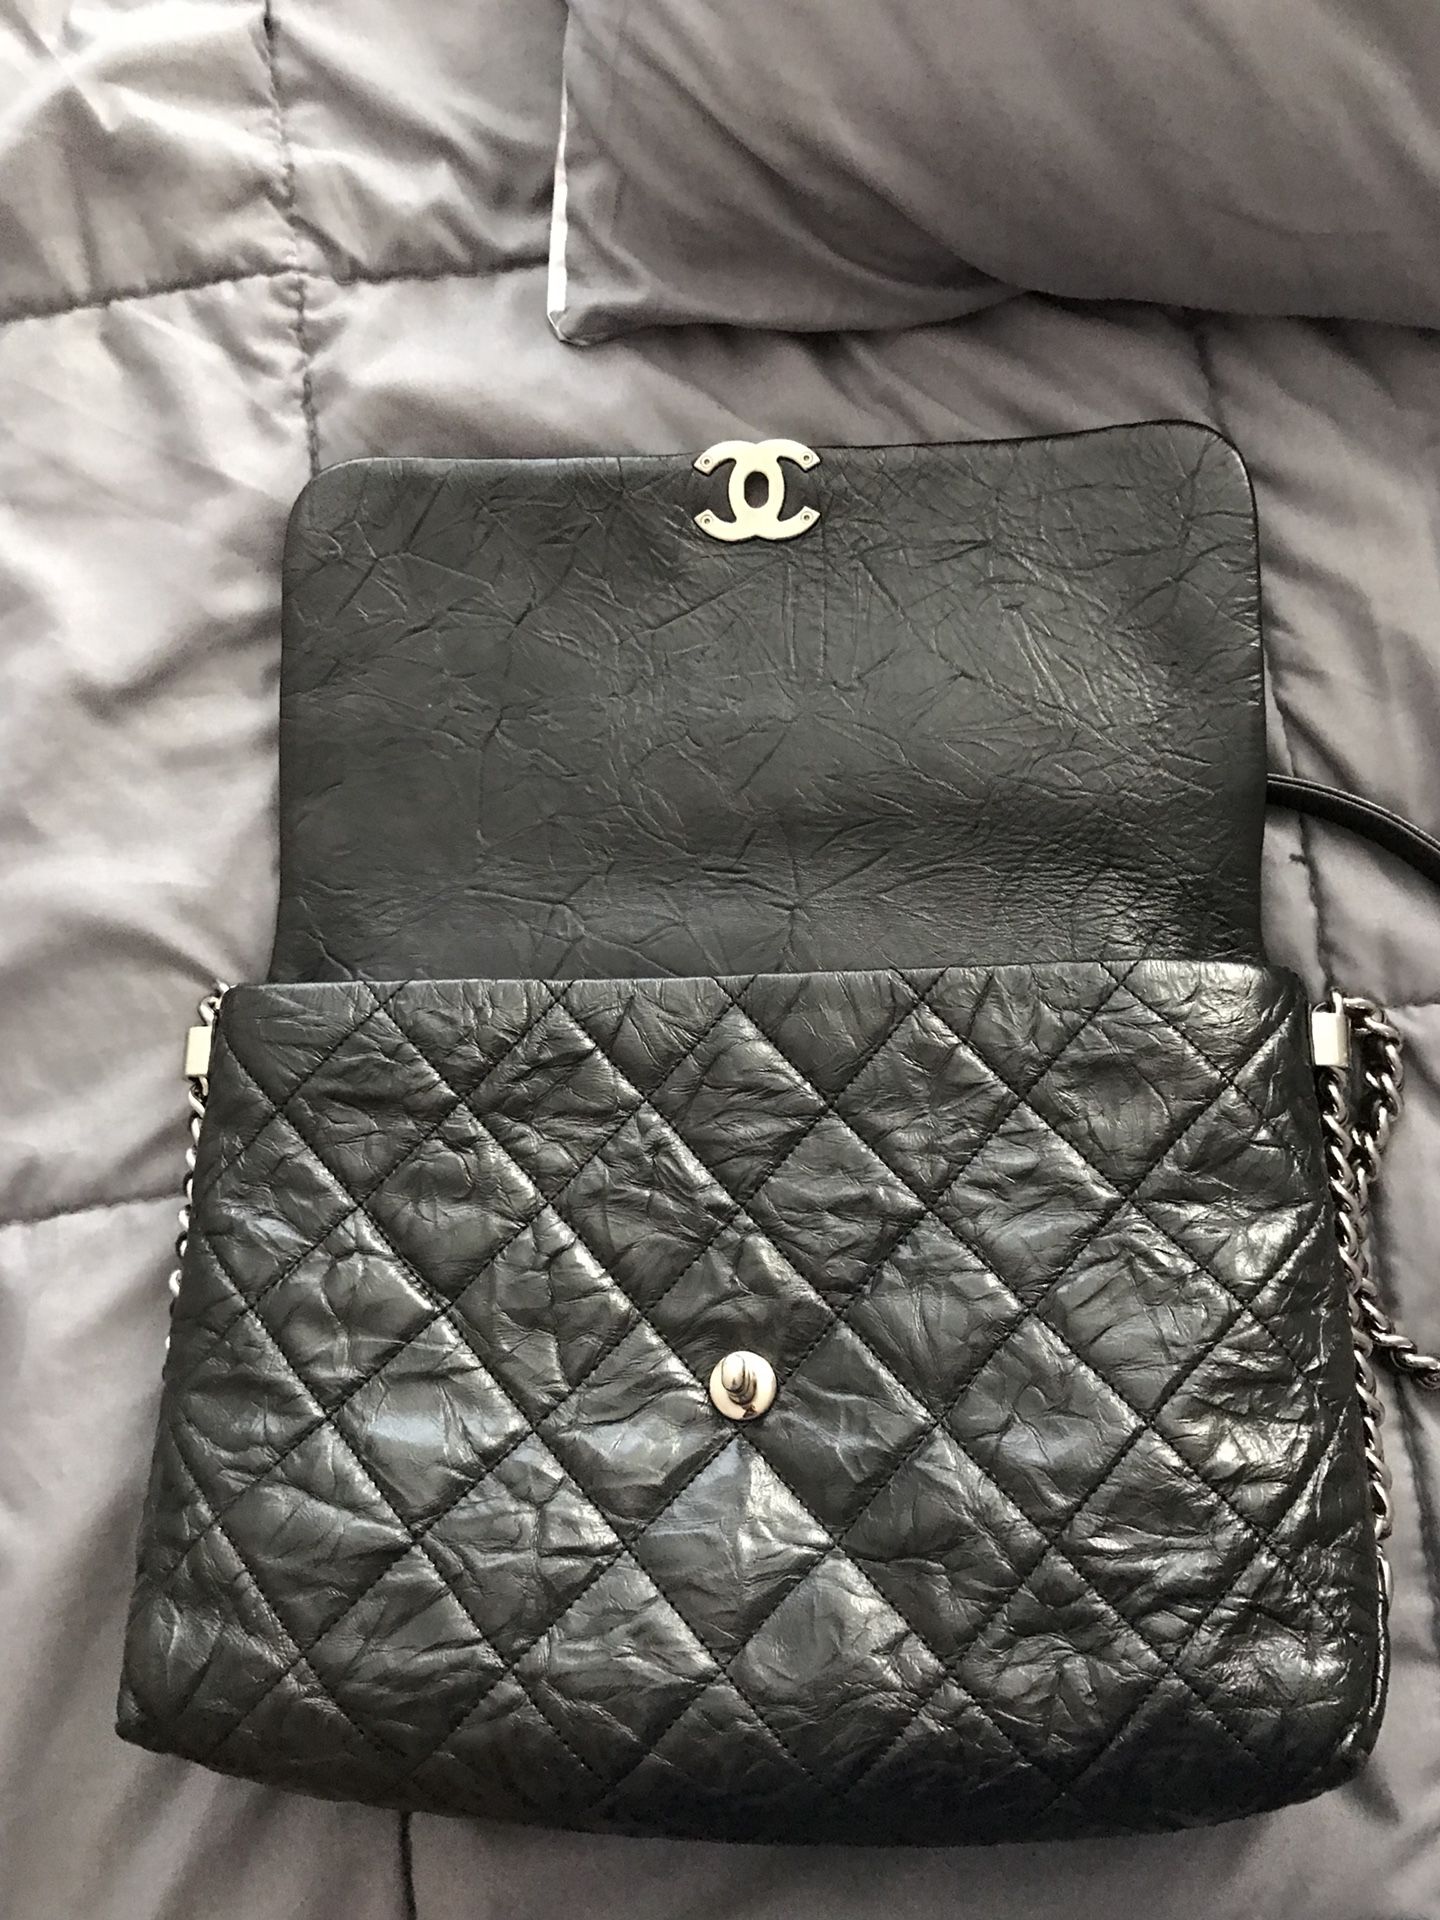 Authentic Chanel Big Bang Crossbody Bag for Sale in Daly City, CA - OfferUp